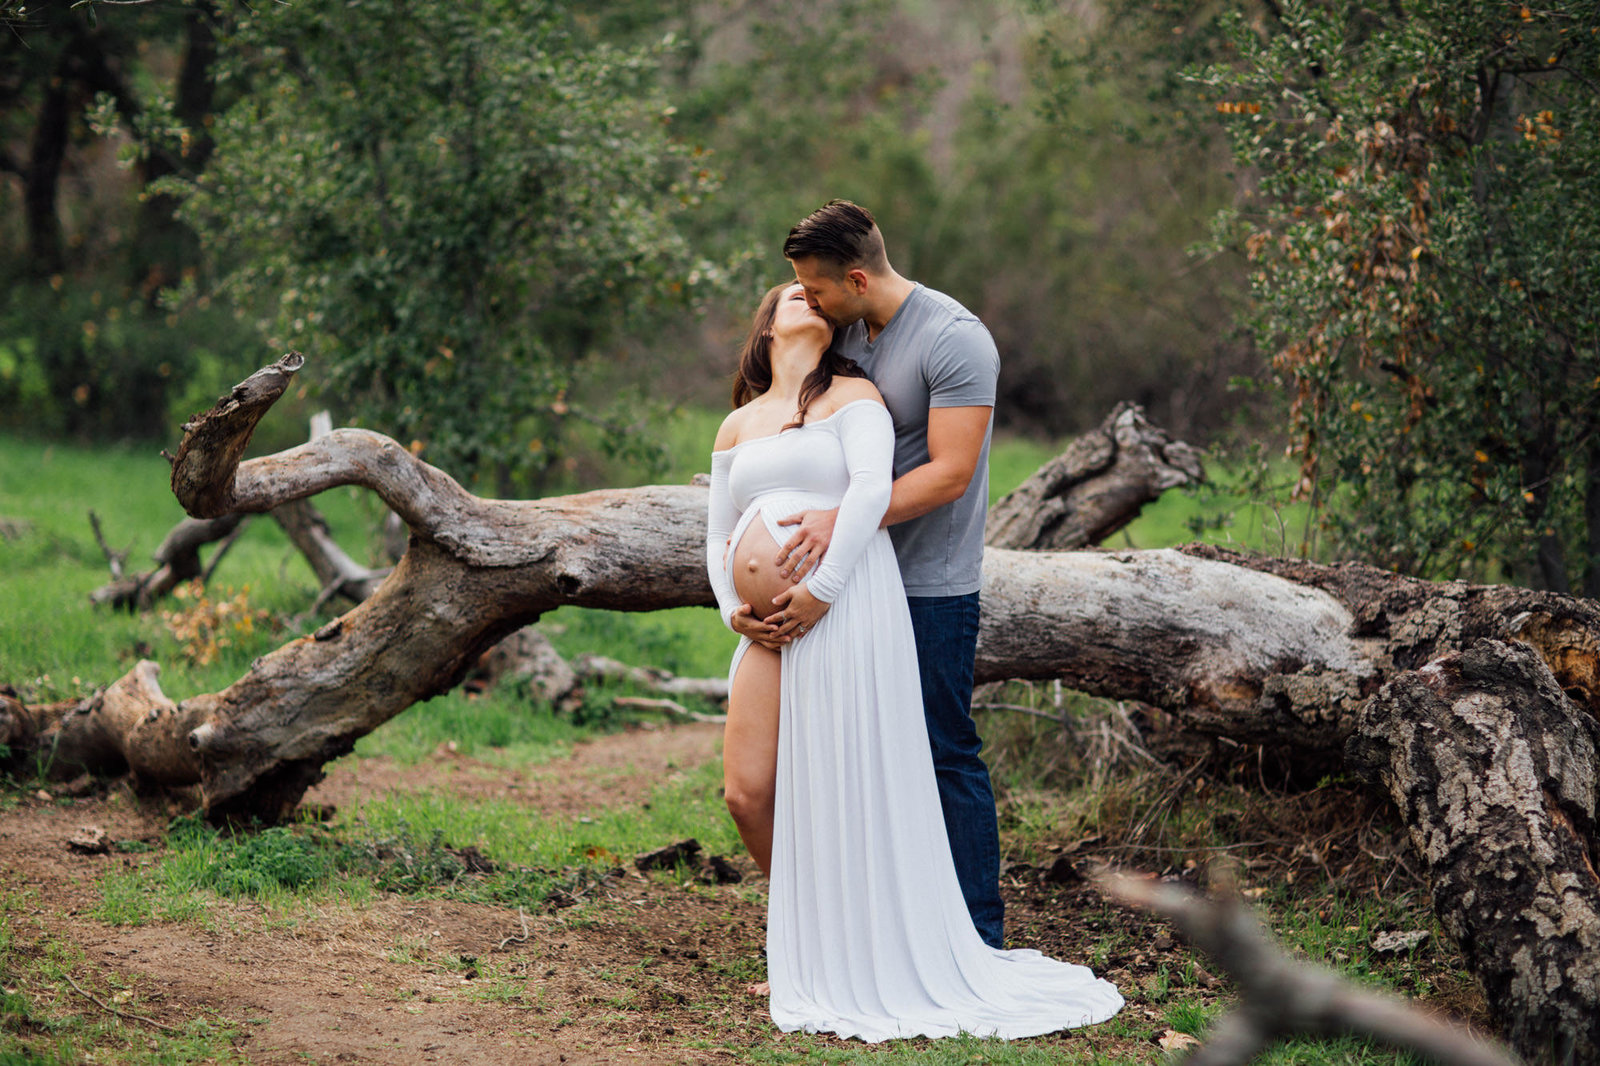 Pregnant wife looks back and kisses her husband as he embraces her during a maternity photo shoot in the woods